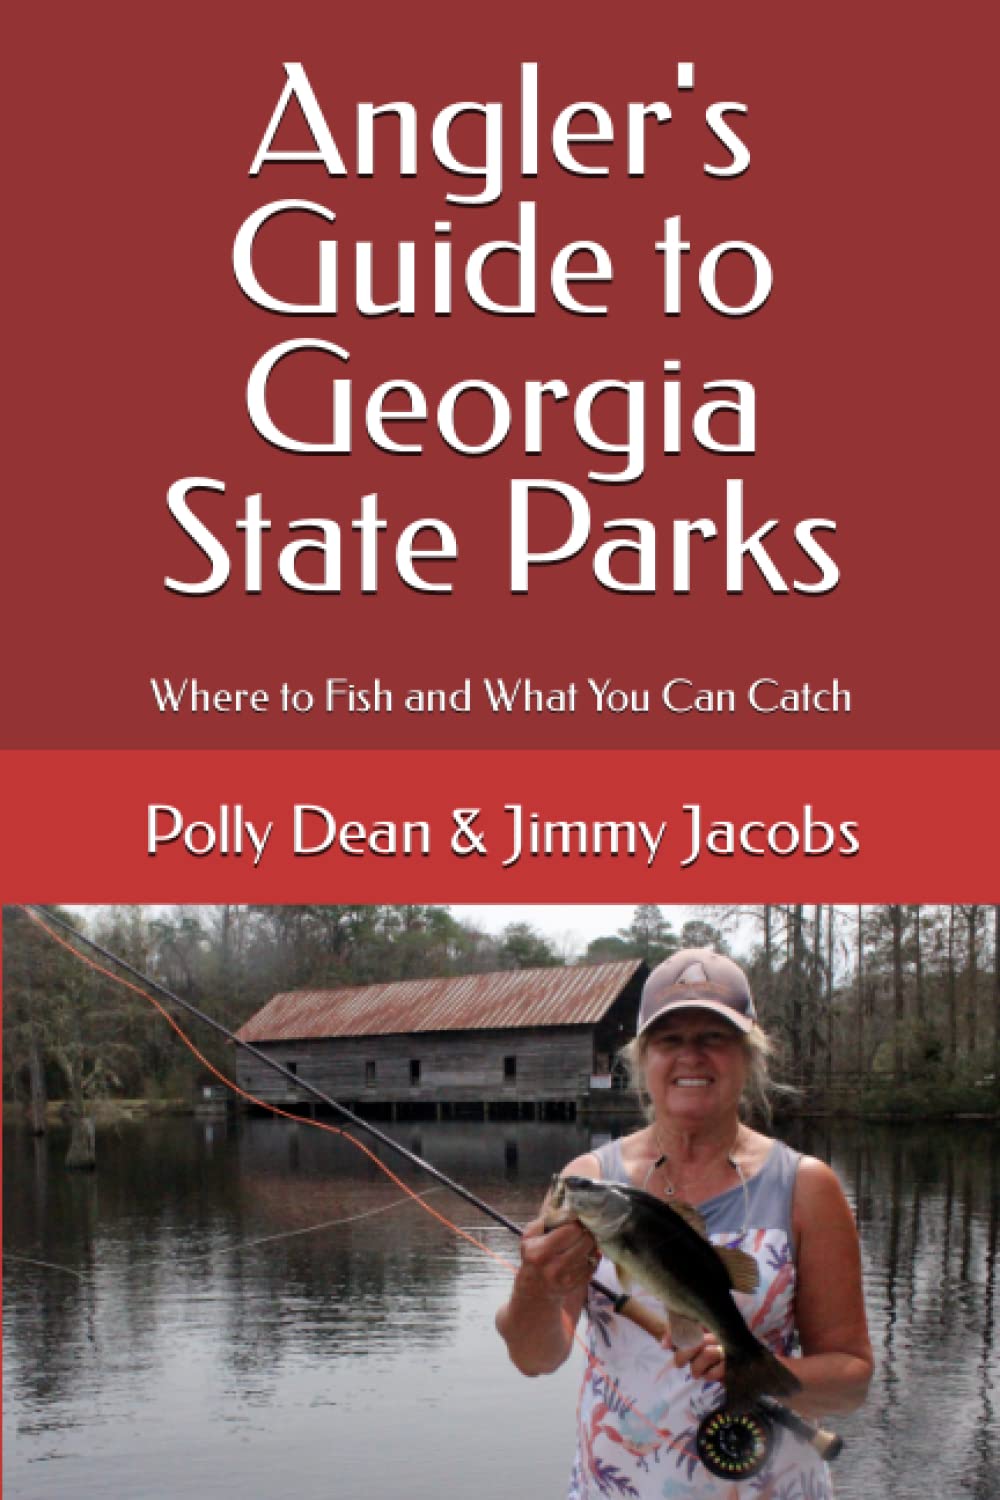 Angler's Guide to Georgia State Parks Book